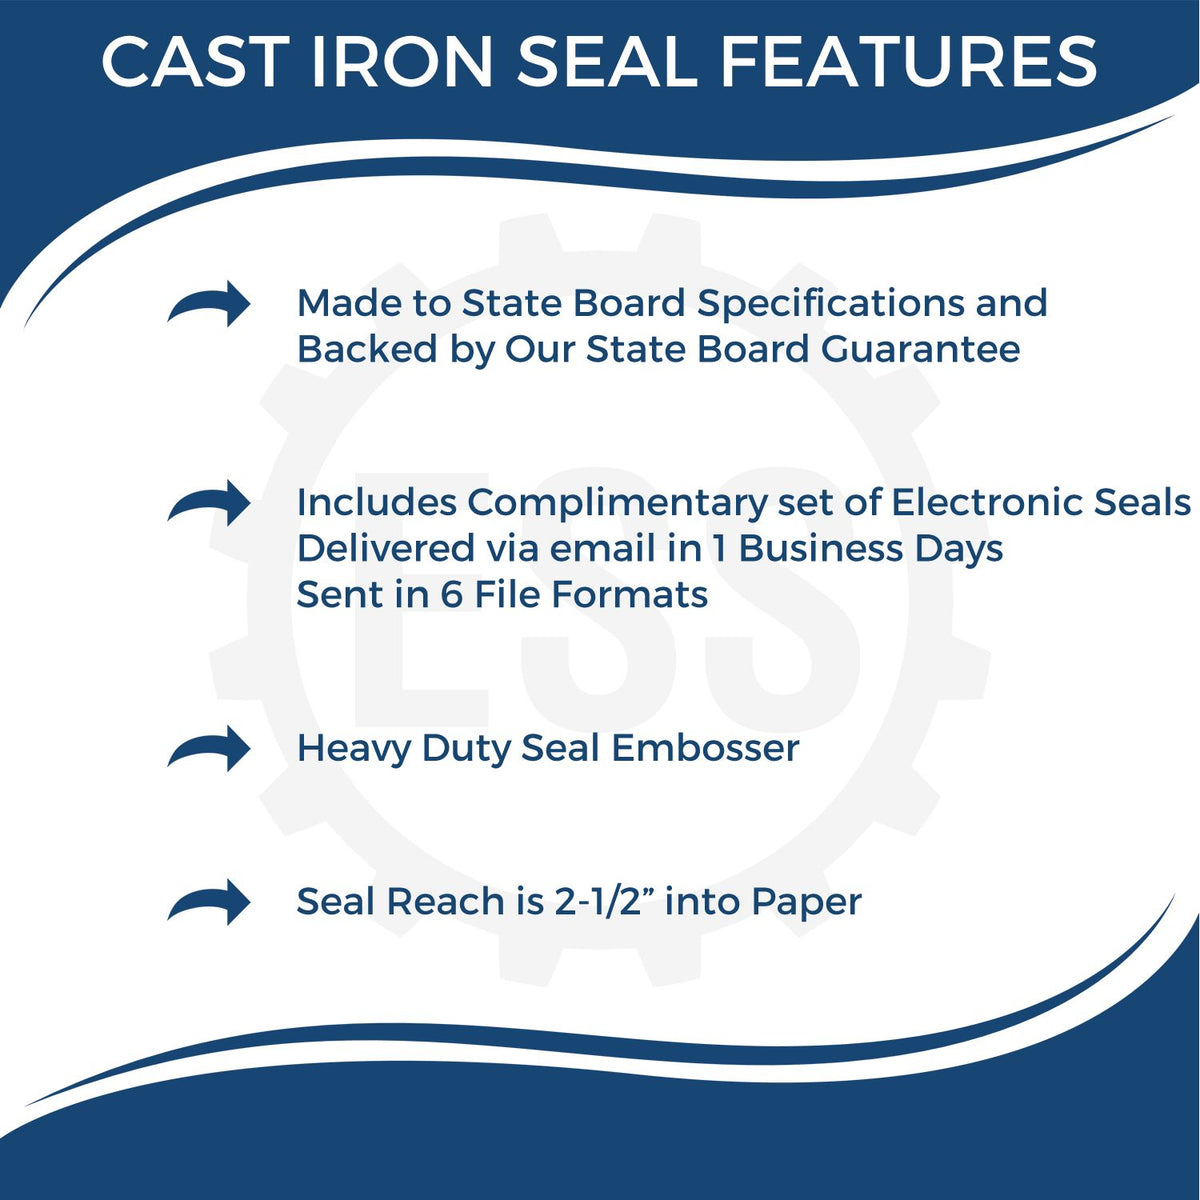 A picture of an infographic highlighting the selling points for the Heavy Duty Cast Iron Florida Architect Embosser